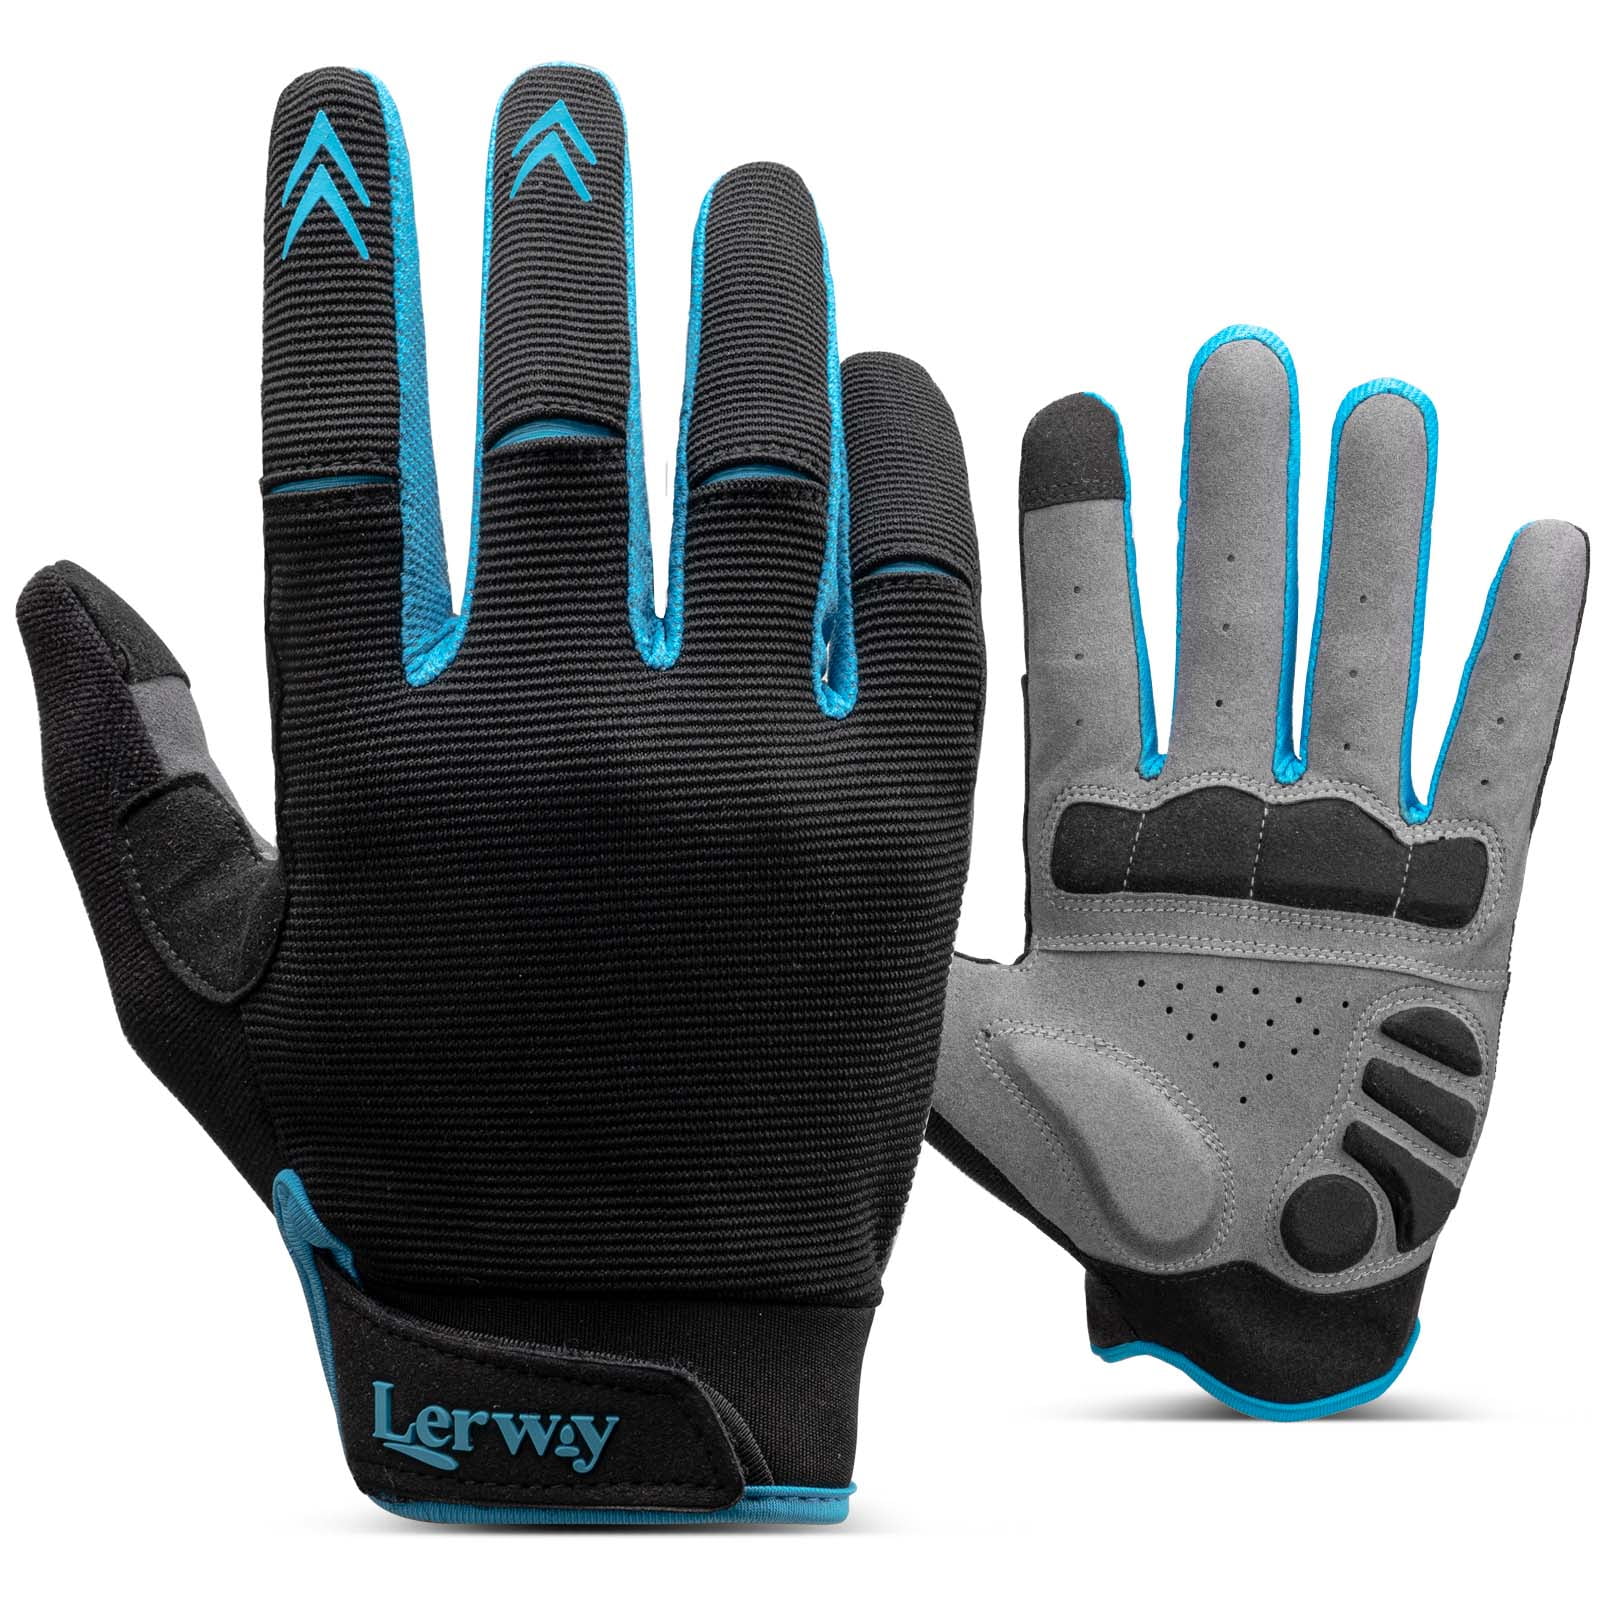 LERWAY Cycling Gloves Bike Mittens Breathable Hole Touchscreen Compatibility M/L 